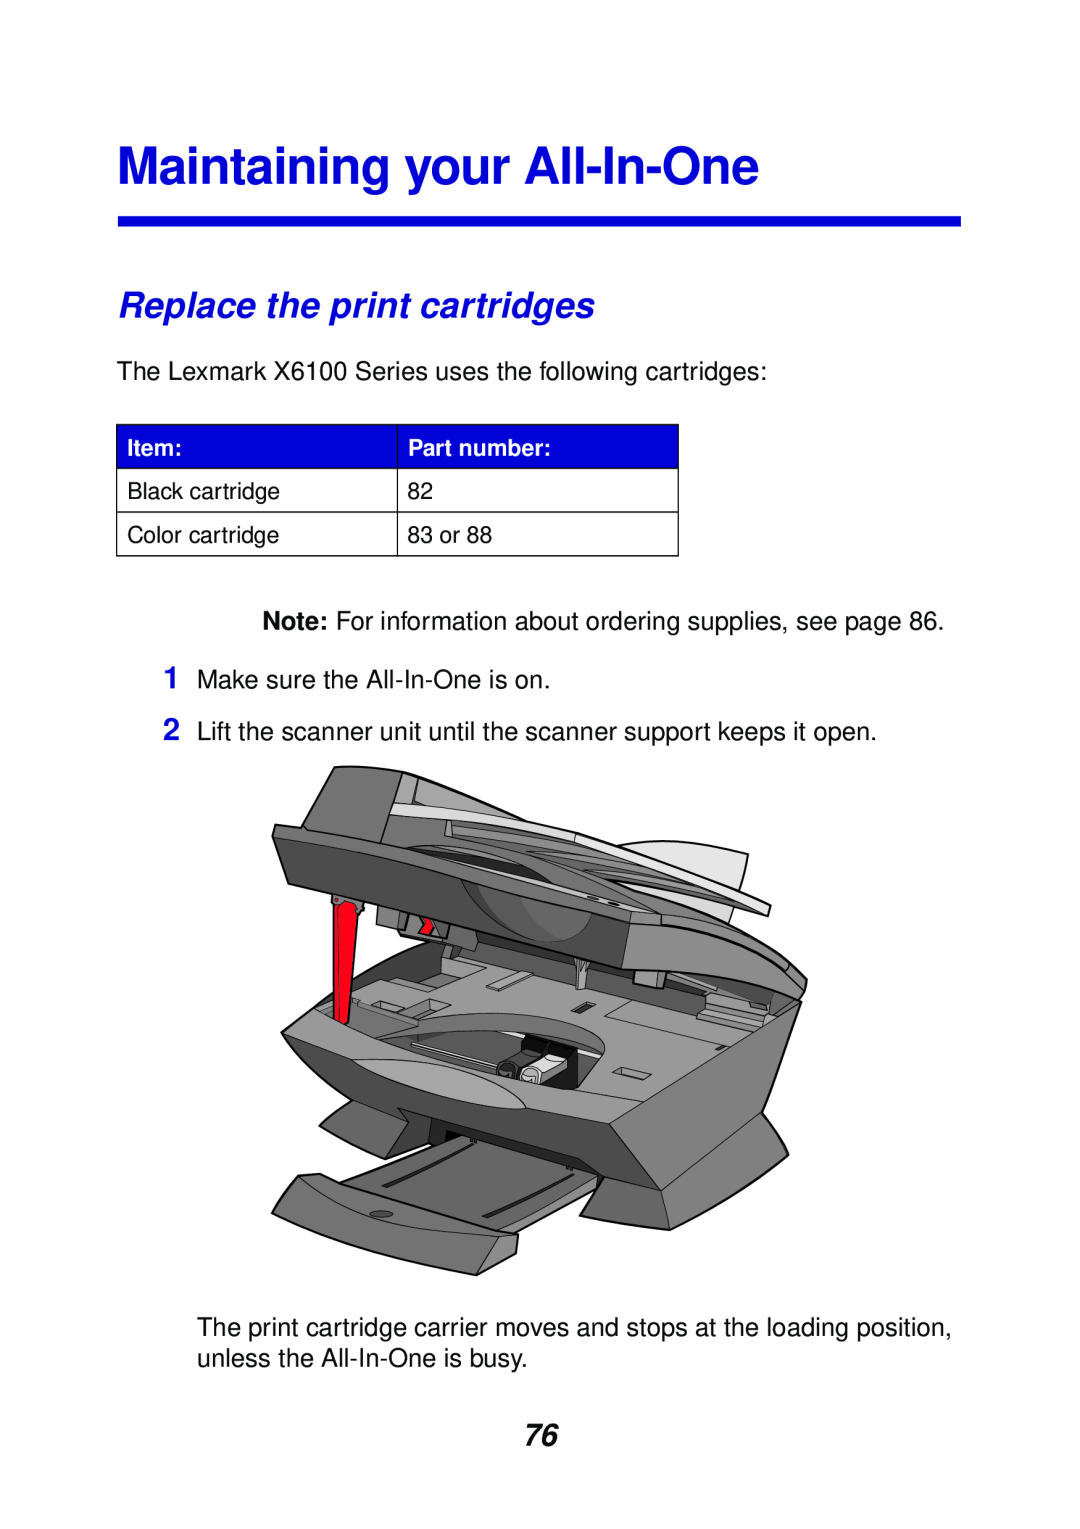 Lexmark X6100 manual Maintaining your All-In-One, Replace the print cartridges 